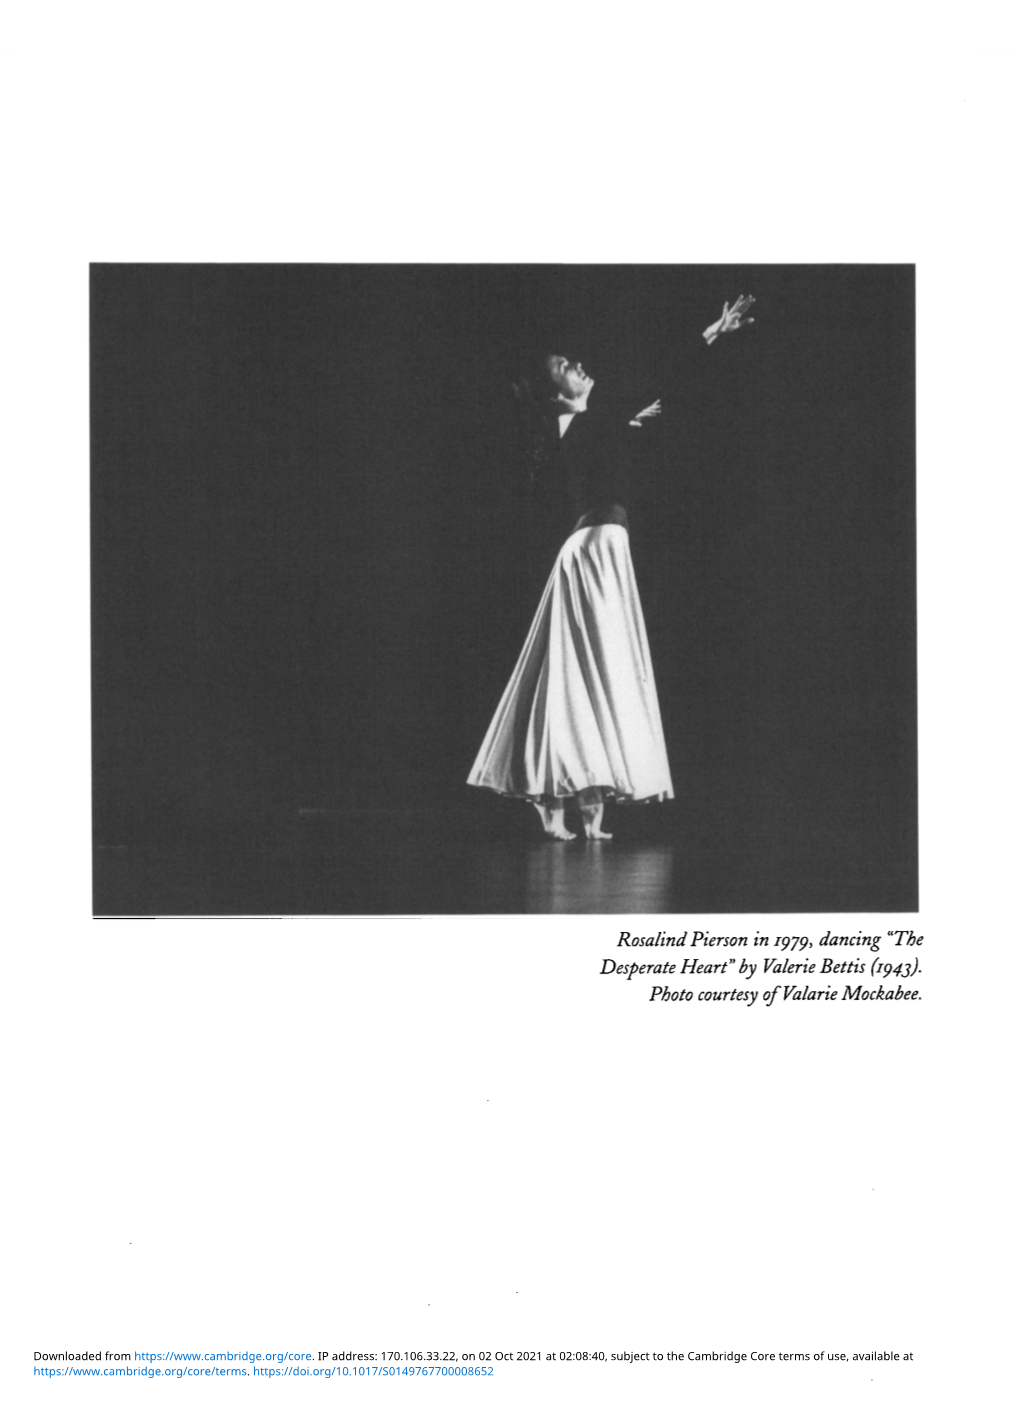 Rosalind Pierson in 1979, Dancing "The Desperate Heart" by Valerie Bettis (1943)